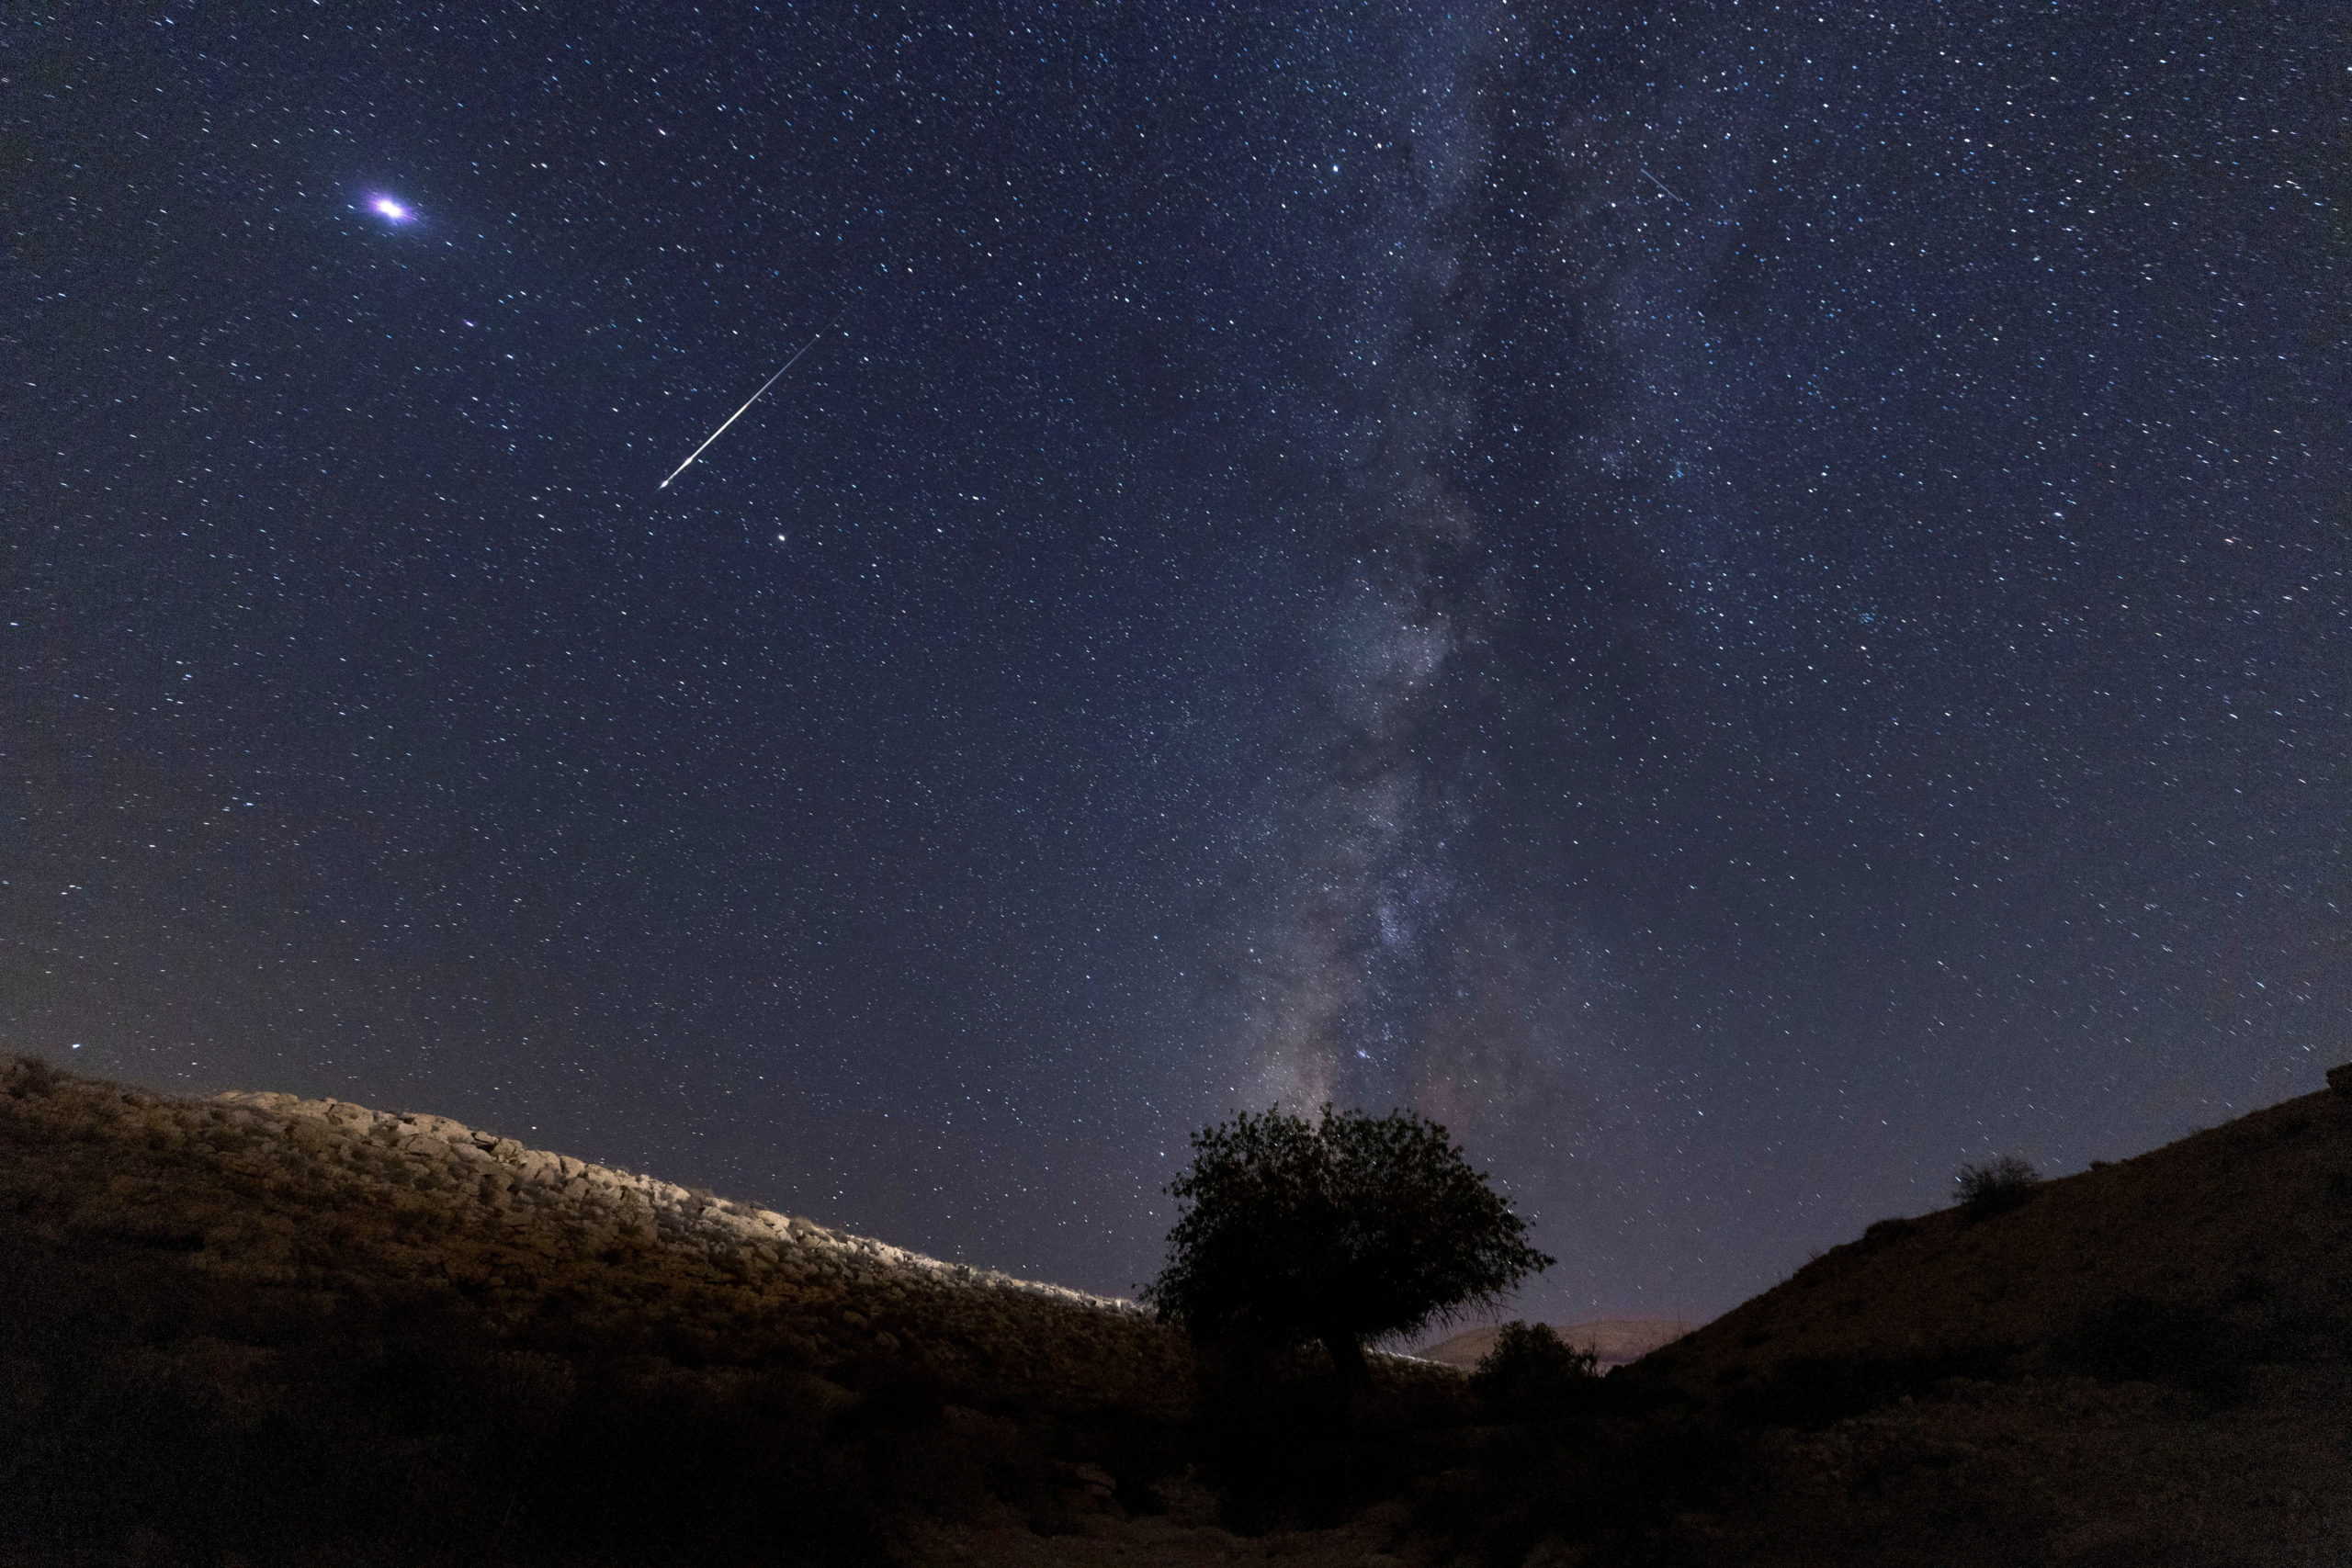 A meteor streaks past stars in the night sky during the annual Perseid